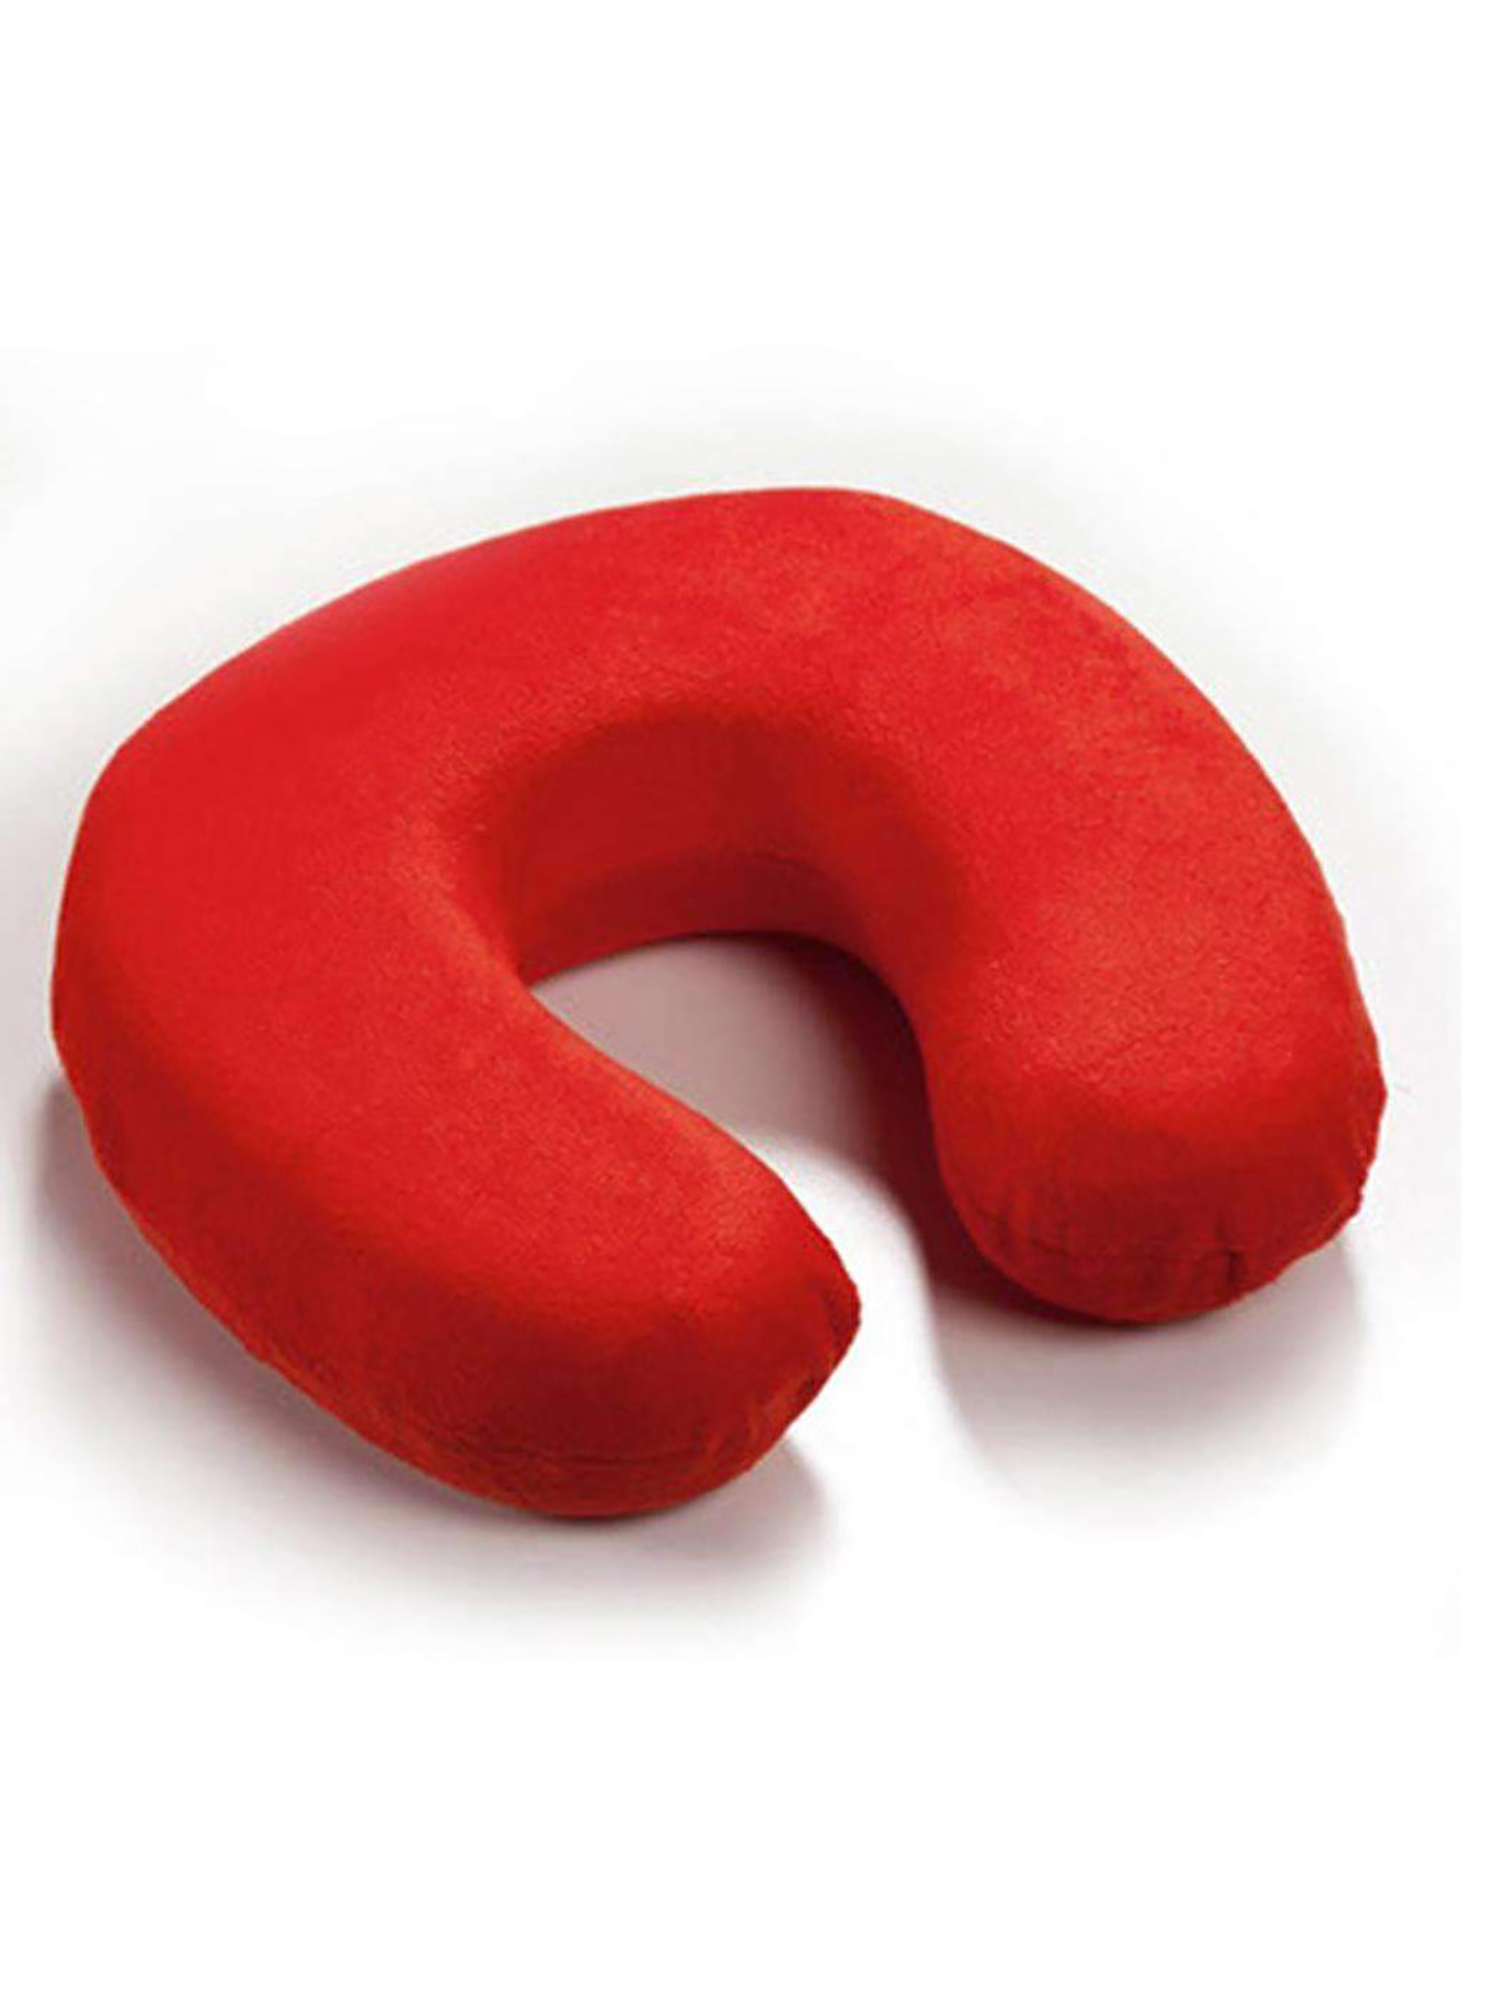 Travel Pillow Memory Foam Neck Cushion Support Rest Outdoors Car Flight - image 3 of 5